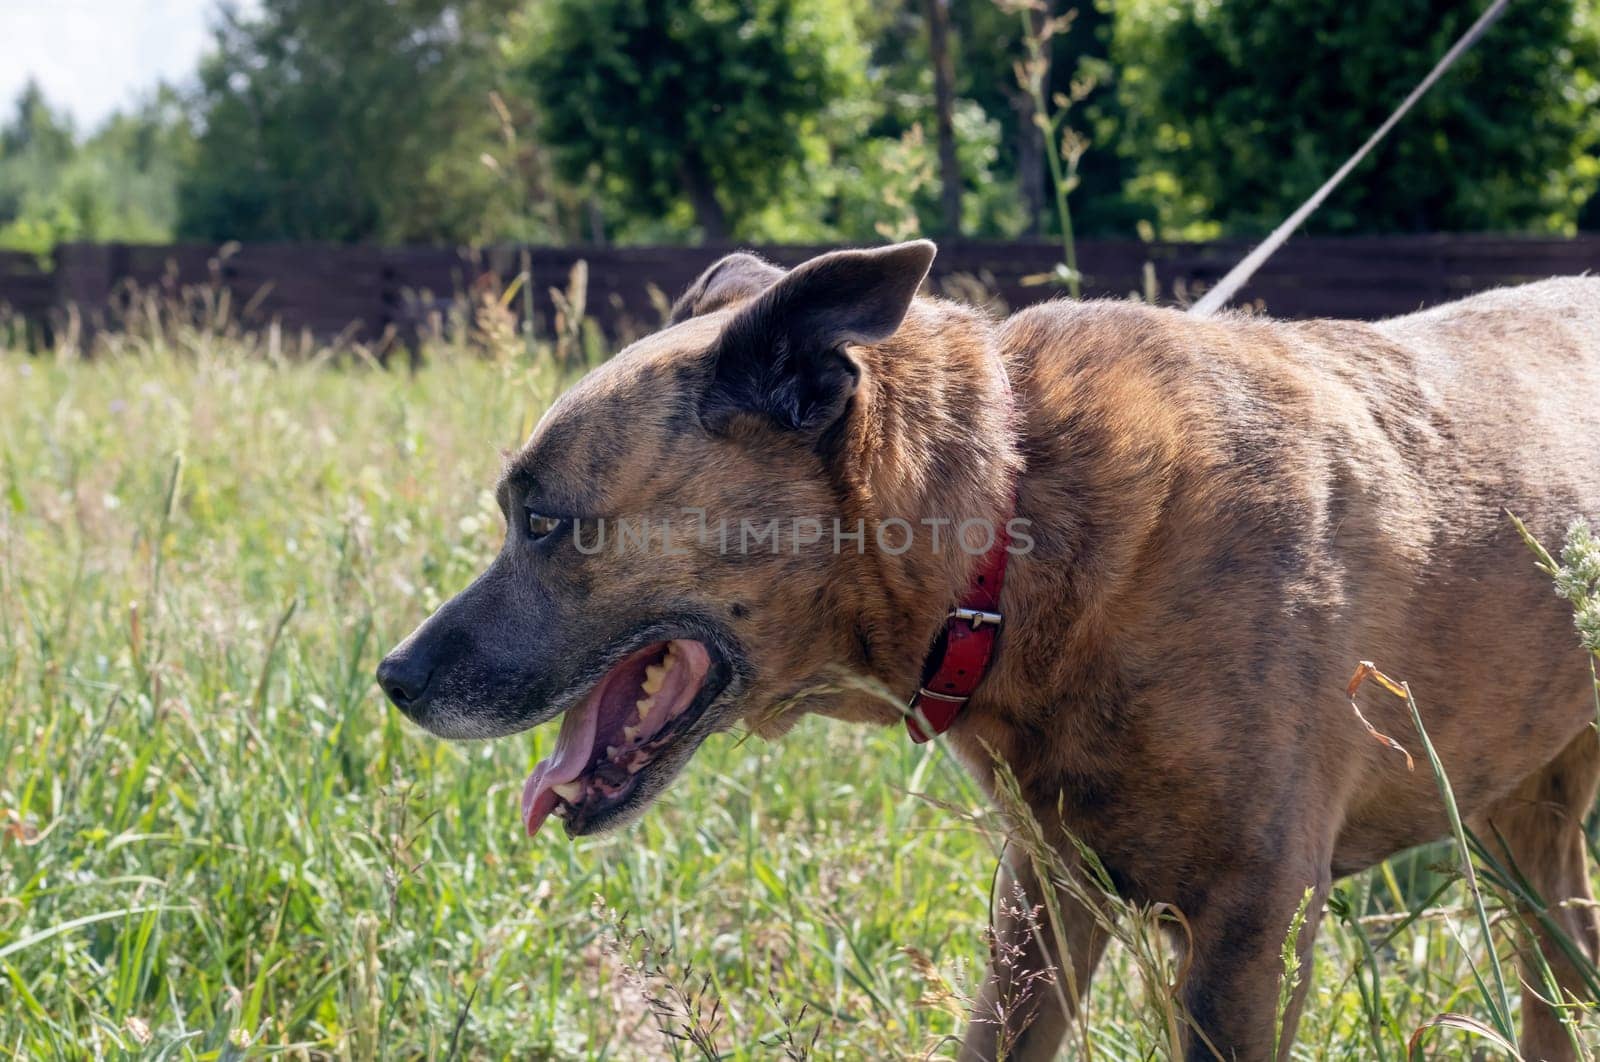 Staffordshire Terrier in the field, close up portrait